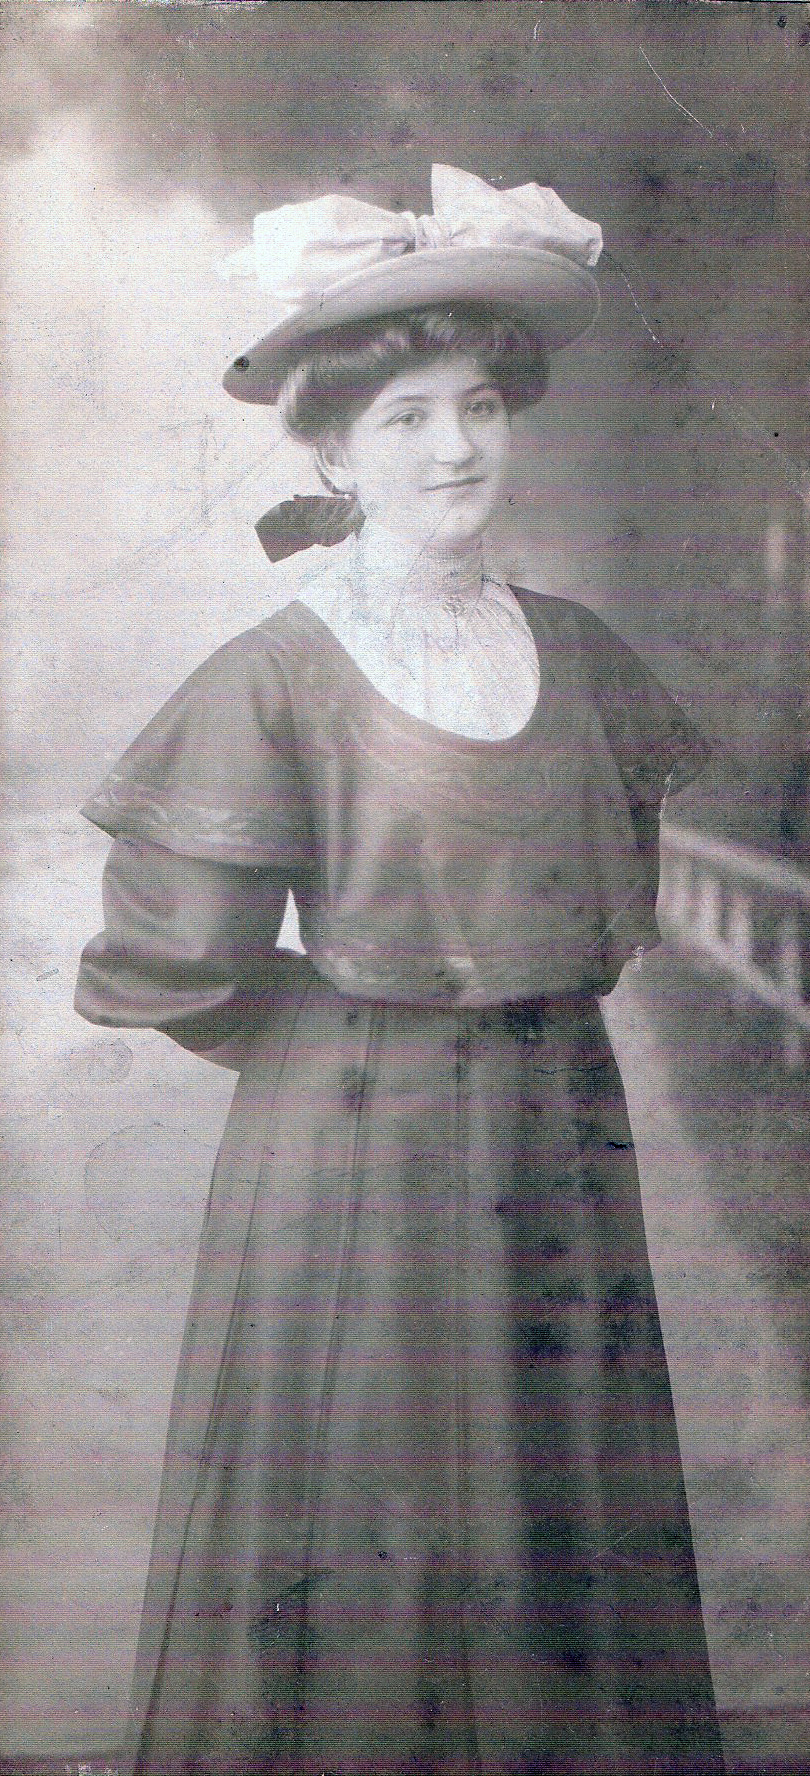 Black and white full length portrait photograph of Emilie Listmann before her wedding to Christian Rau